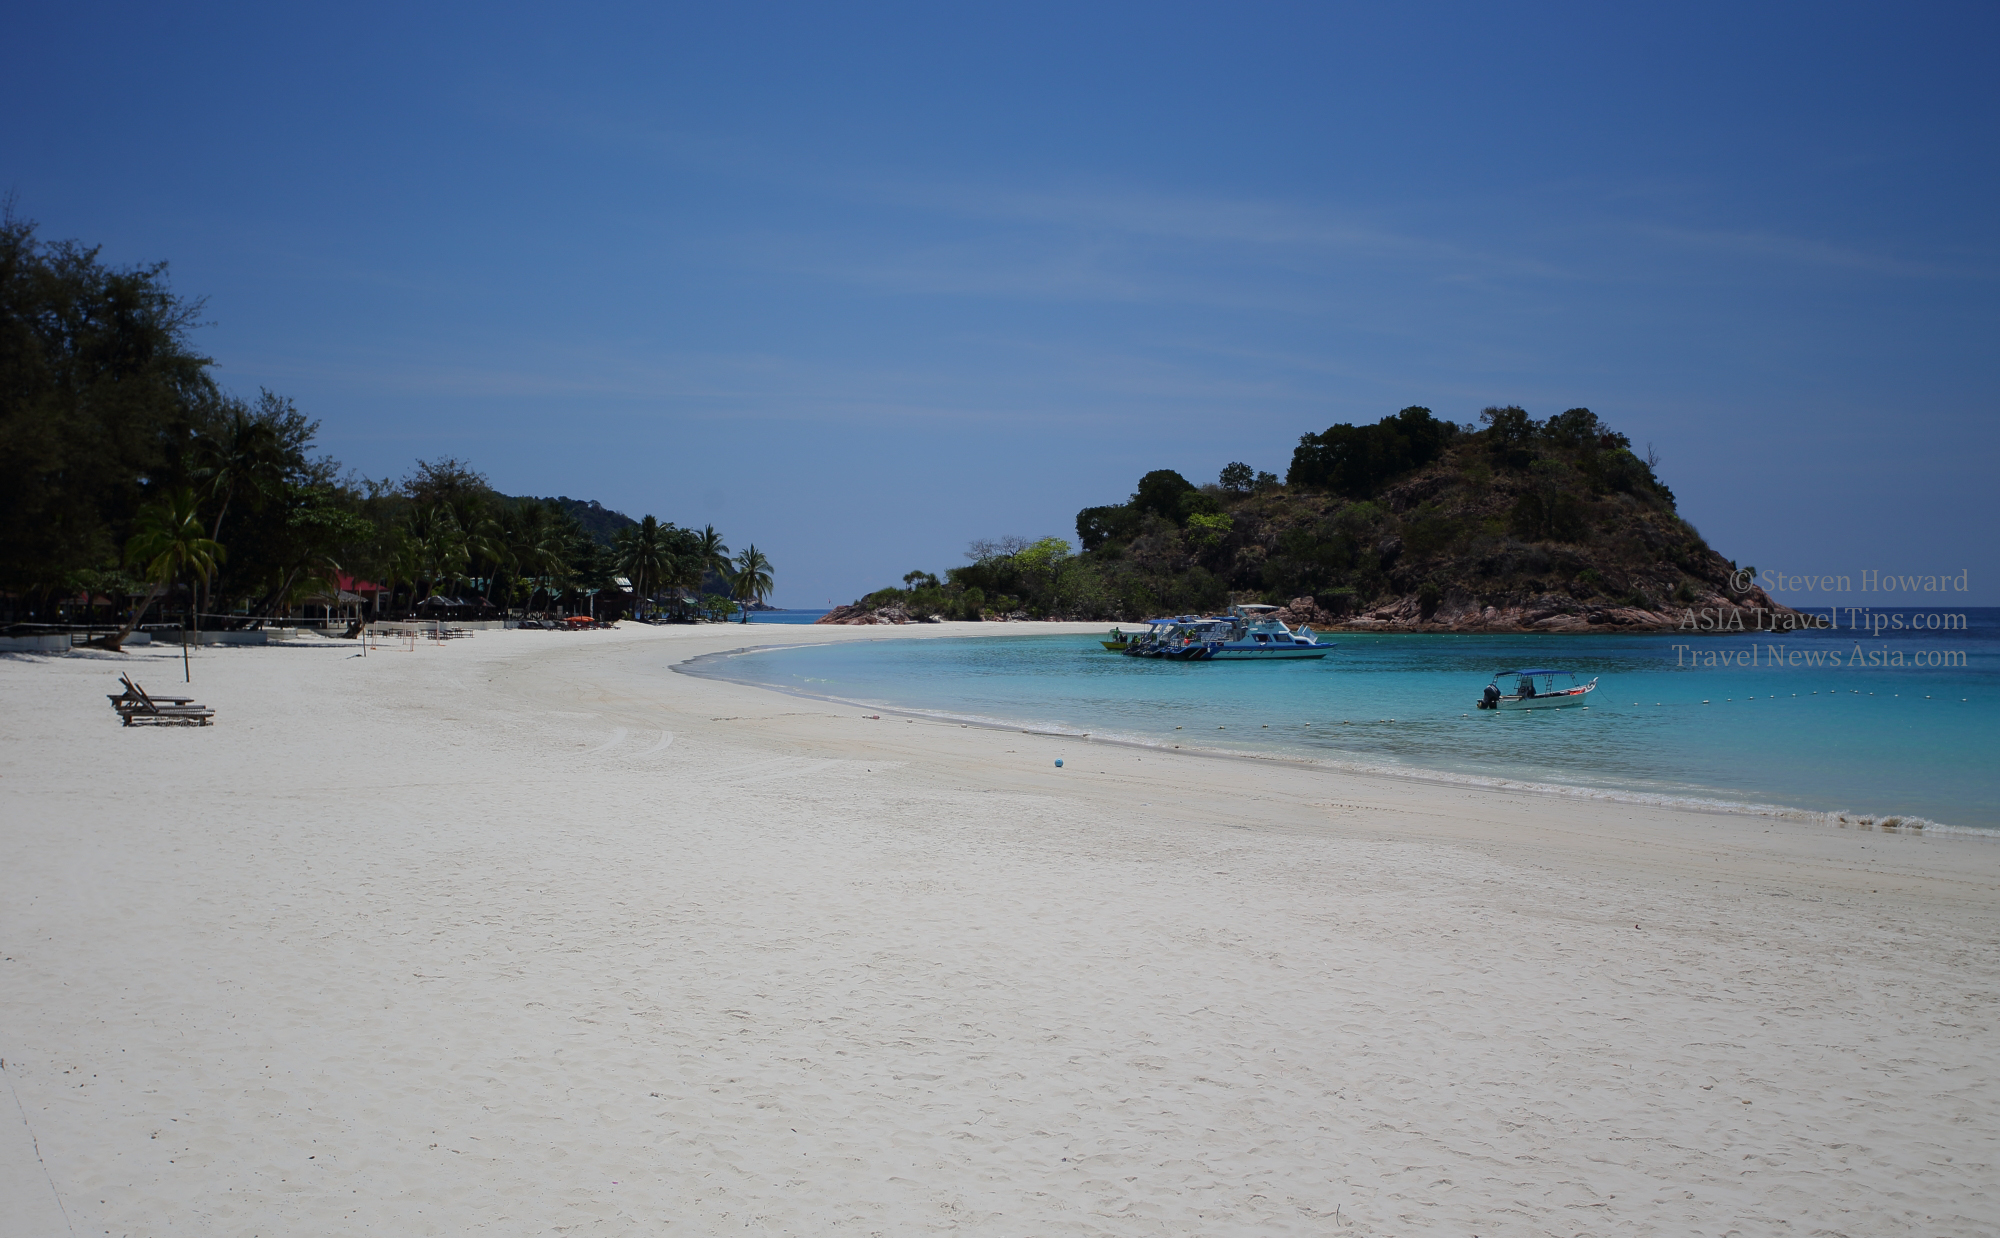 Beach in Terrengganu, Malaysia. Picture by Steven Howard of TravelNewsAsia.com Click to enlarge.